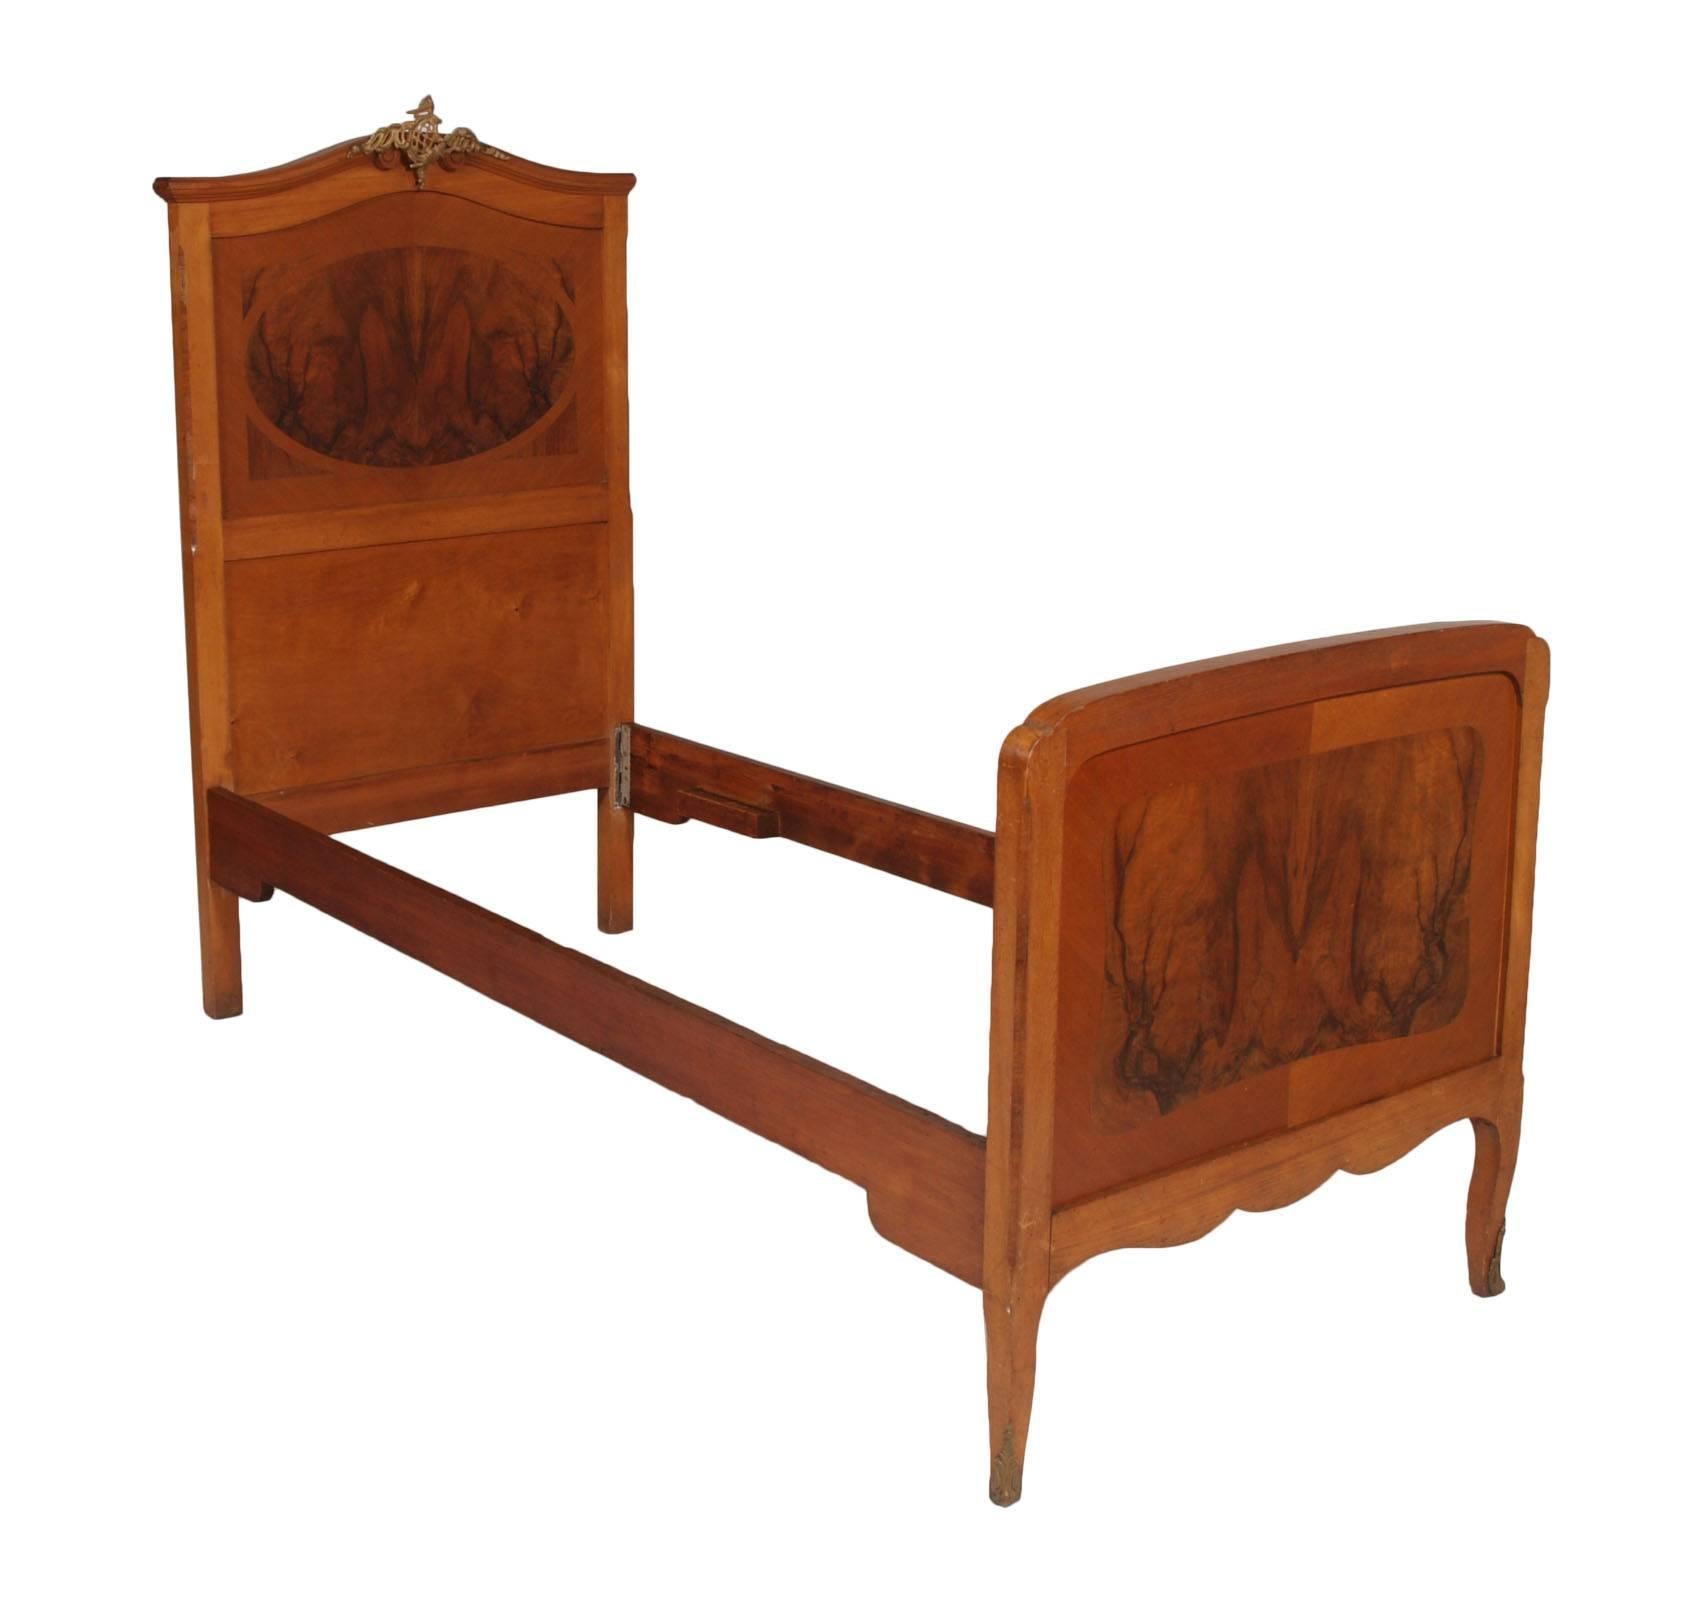 Early 20th century antique Italian Art Nouveau pair of beds in cheerywood and burl walnut with golden bronze adornments

Measures cm: H 160 / 92 W 90  D 210.

A. Meroni & R. Fossati - founded in 1870, it was one of the oldest and most important